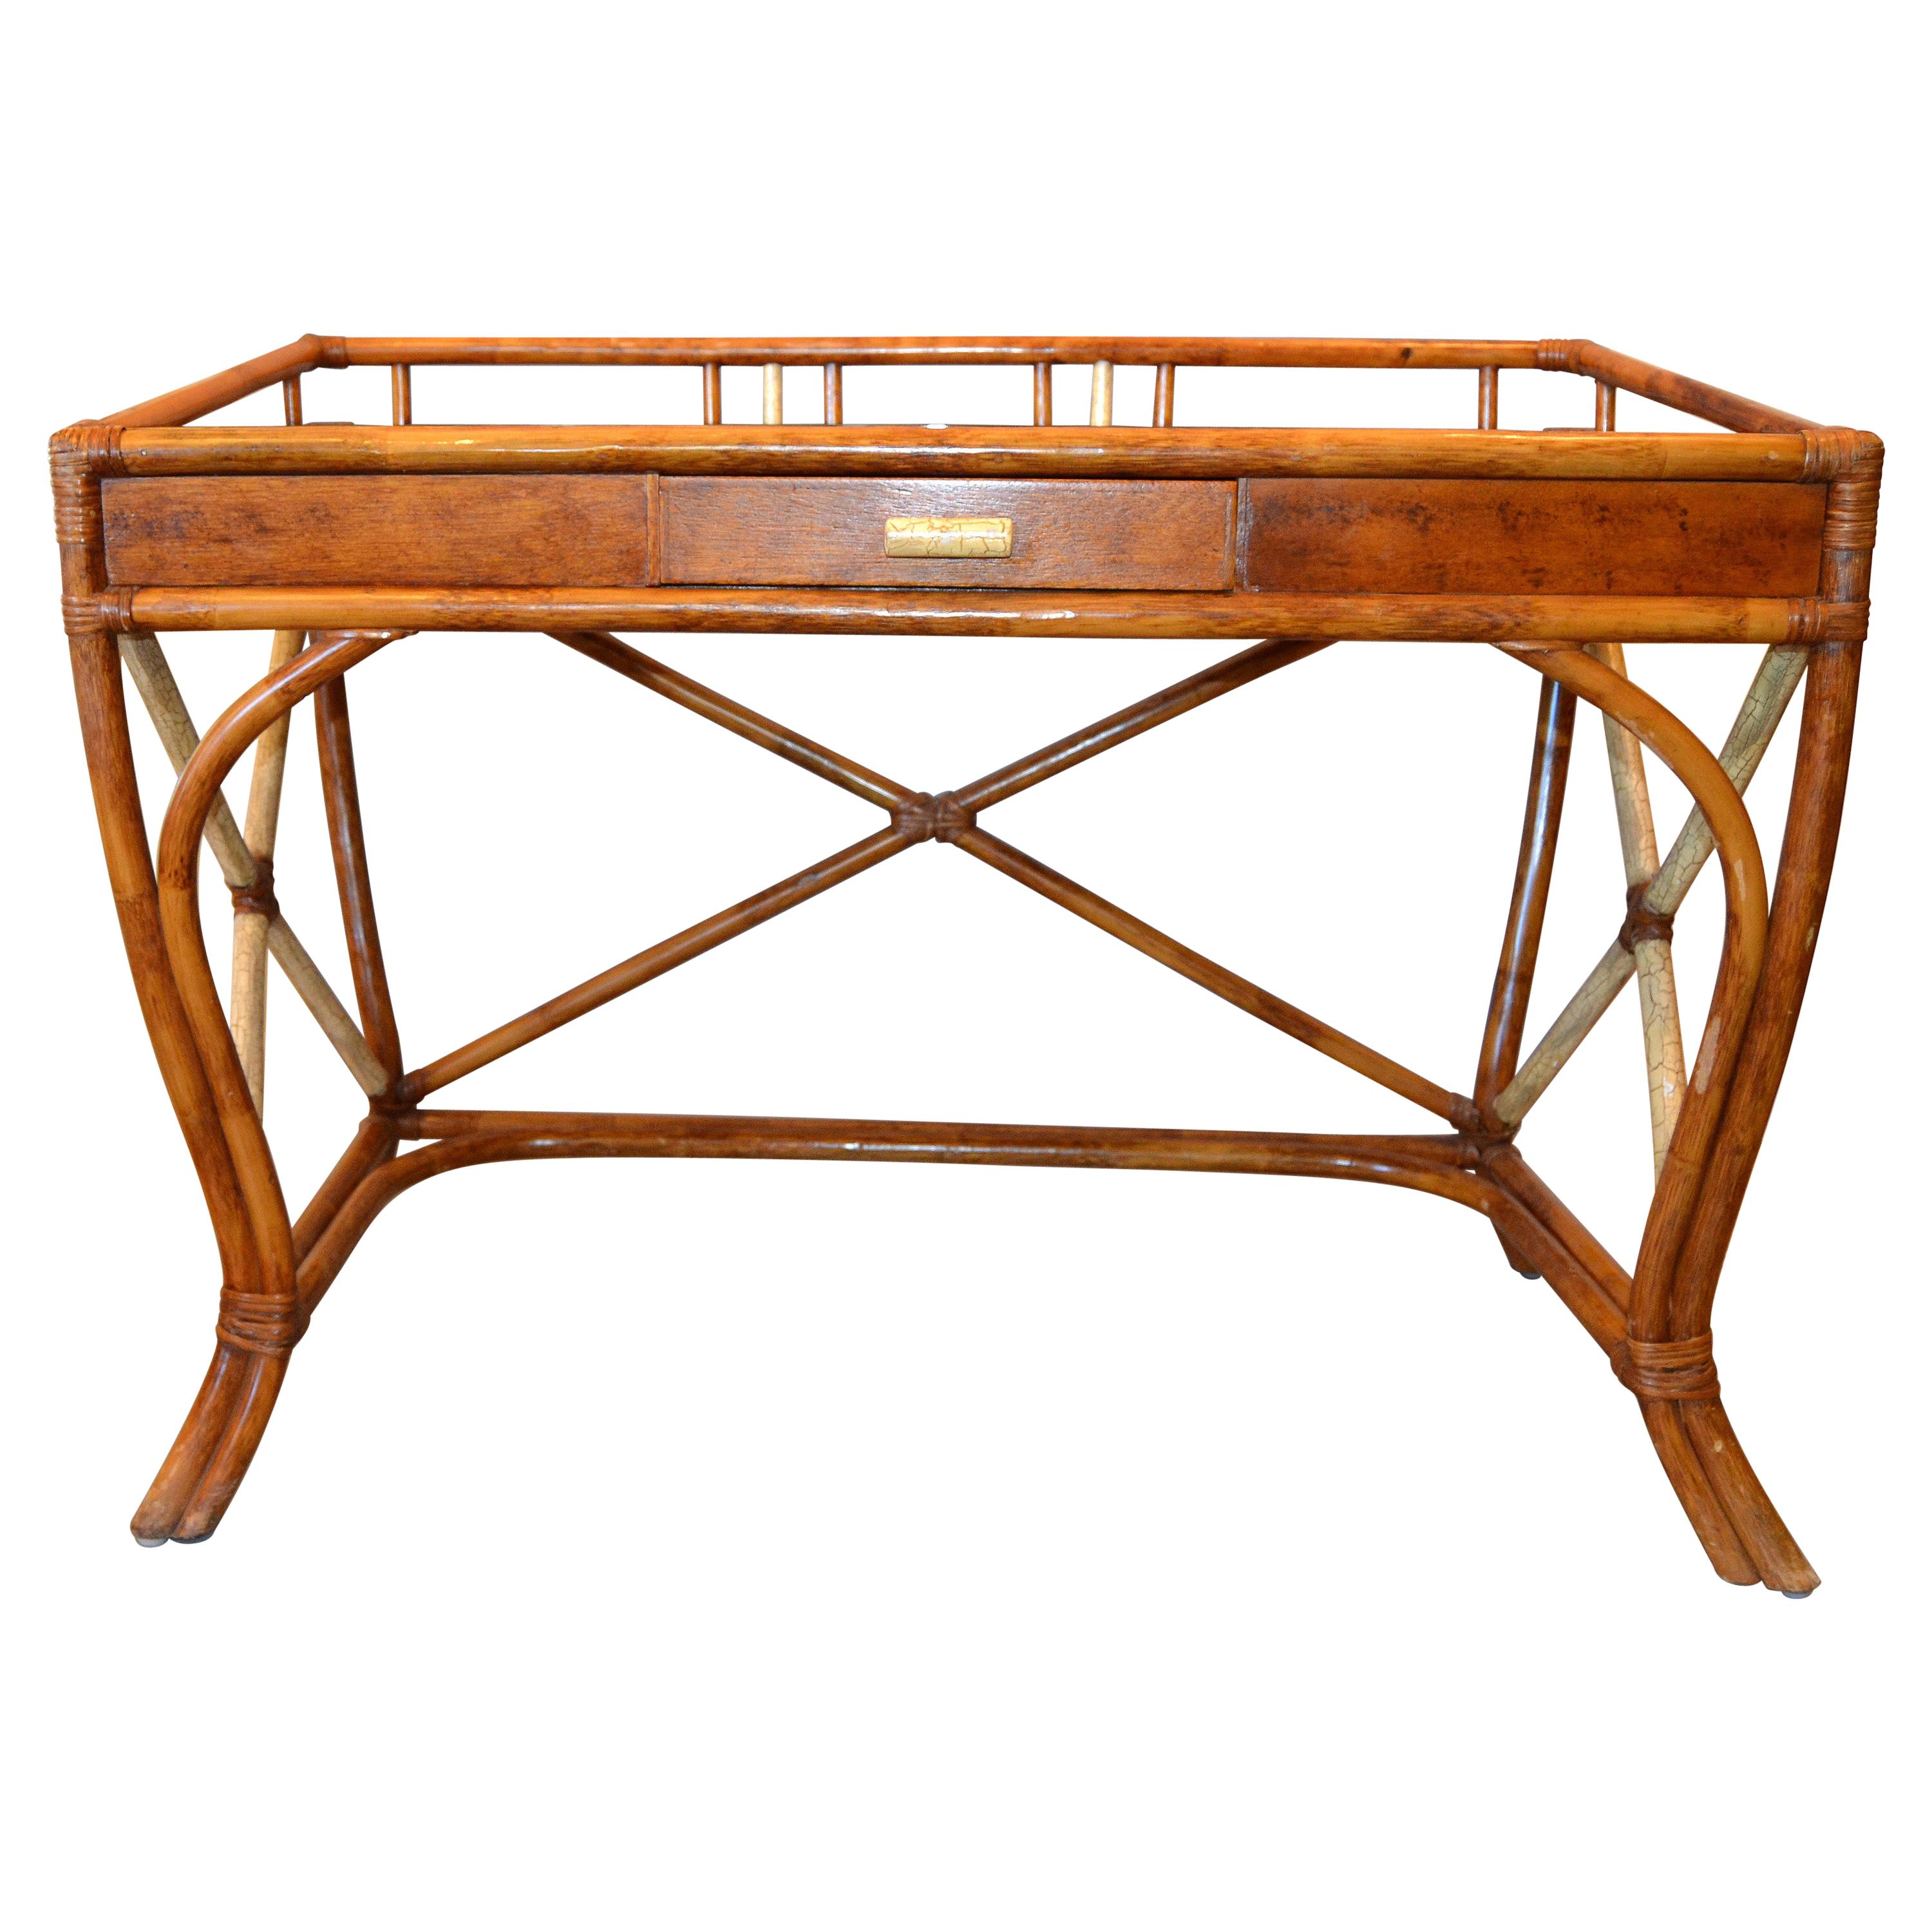 Boho Chic Vintage Handcrafted Bamboo Desk, Writing Desk with Drawer & Glass Top 